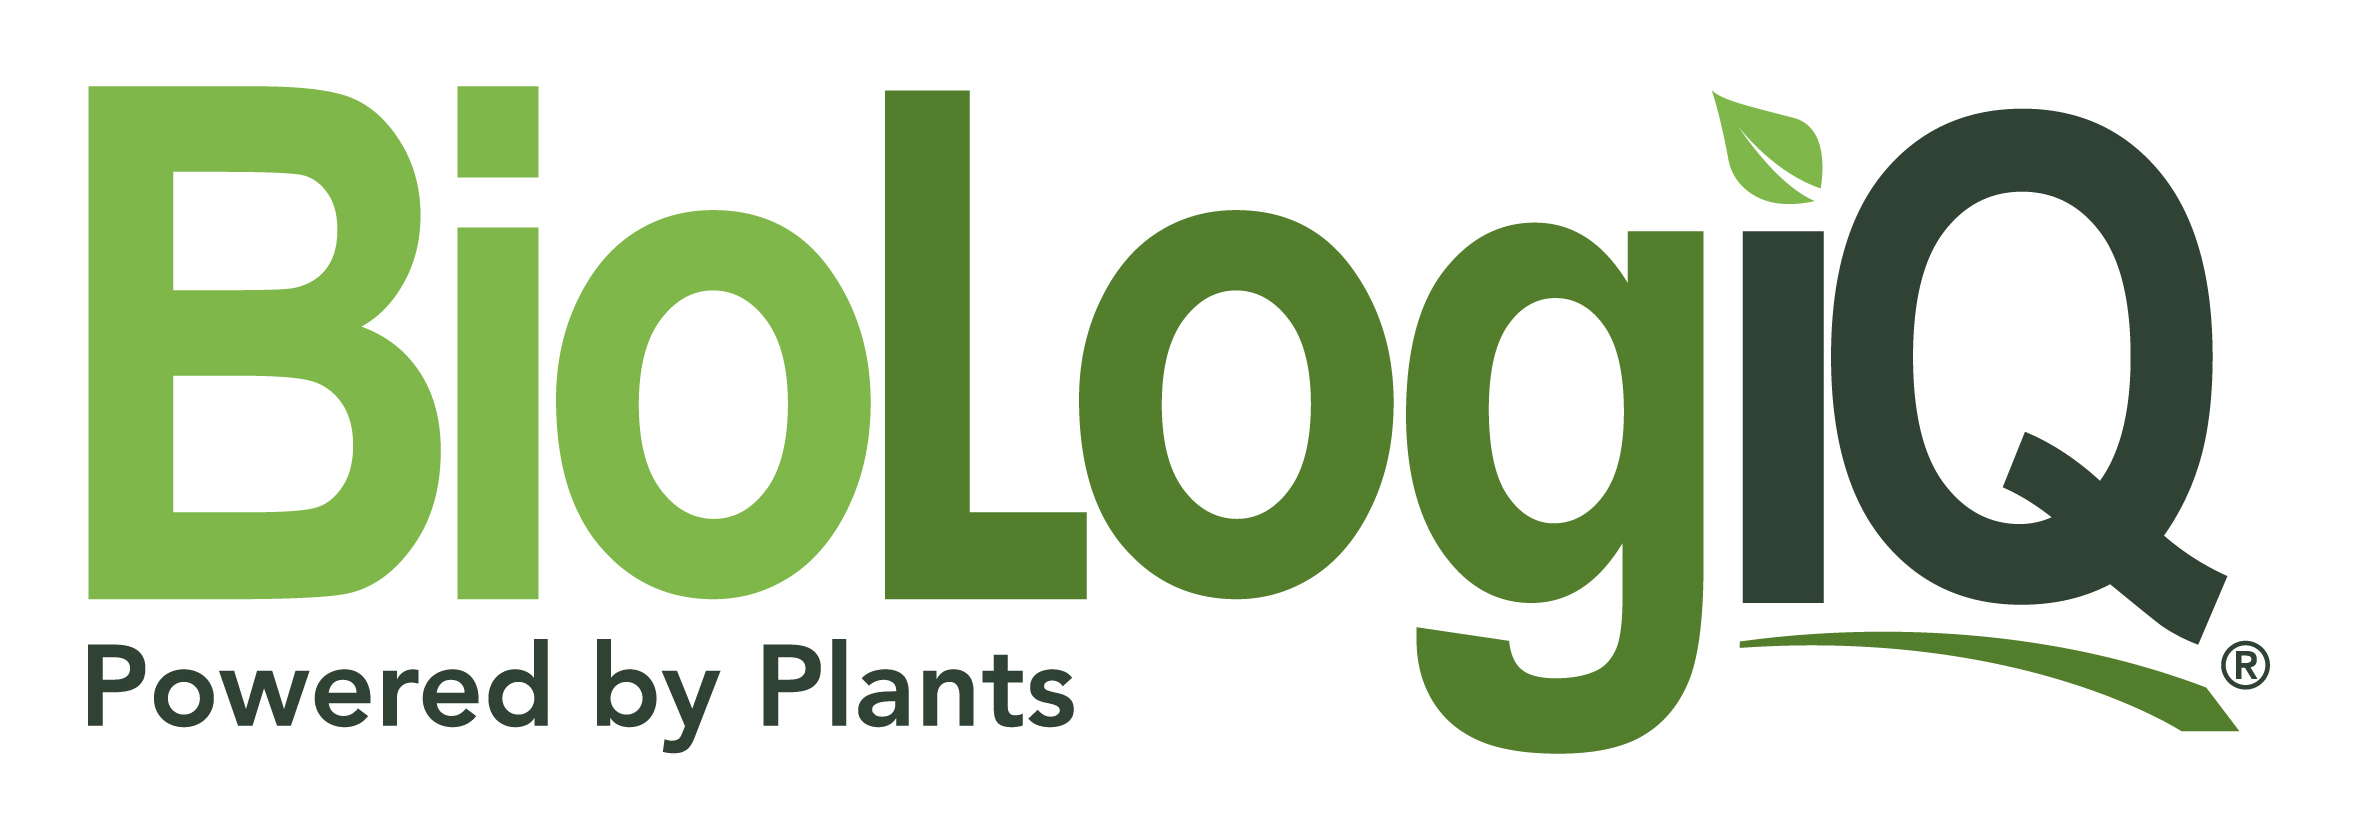 BioLogiQ is a a bioplastics leader with a footprint in both the U.S. and Asia.